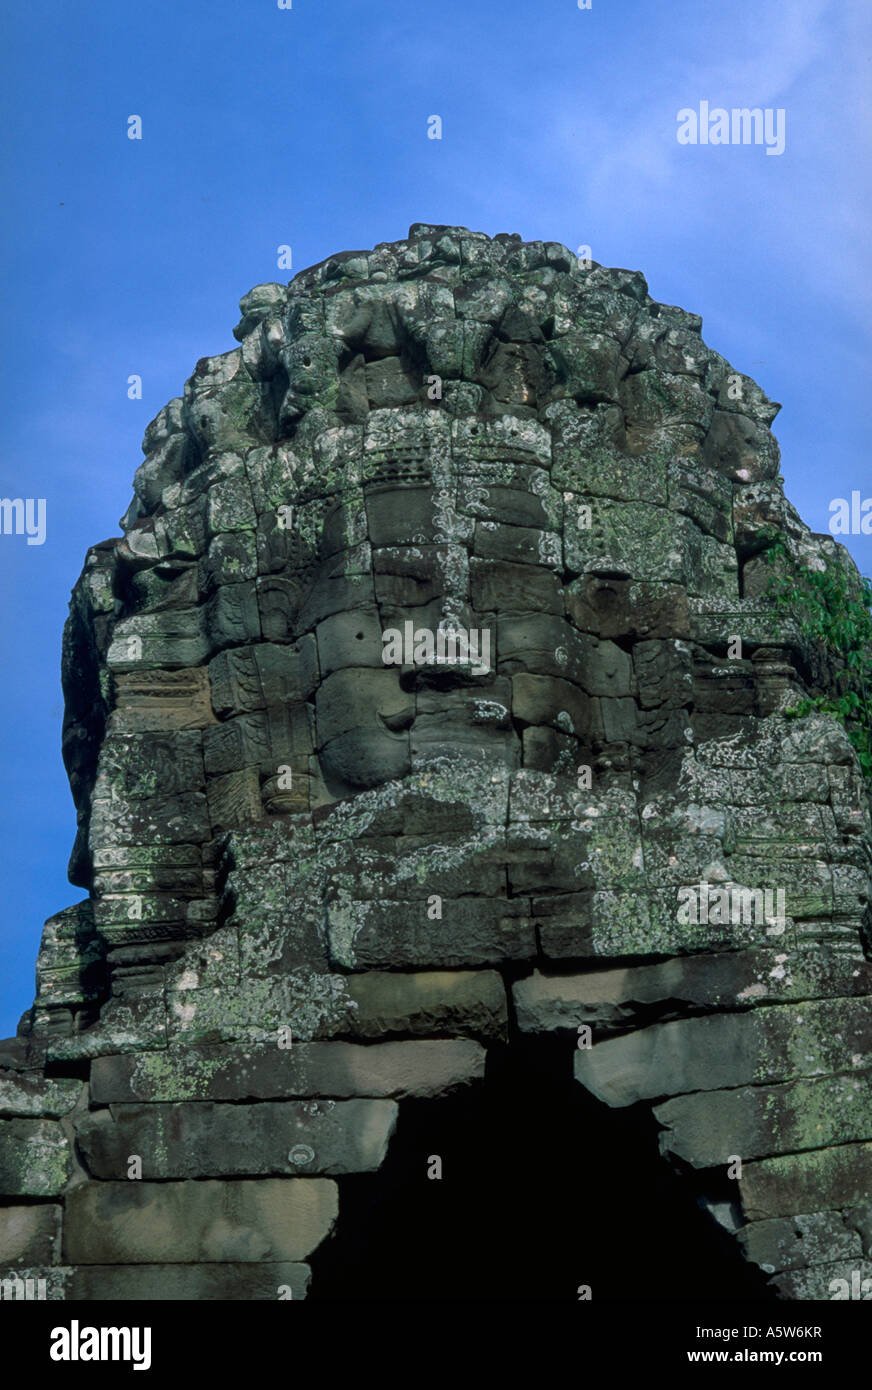 Painet hl0764 angkor thom cambodia wat asia khmer amazement historical legacy art scenics landscapes southeast aged ancient Stock Photo